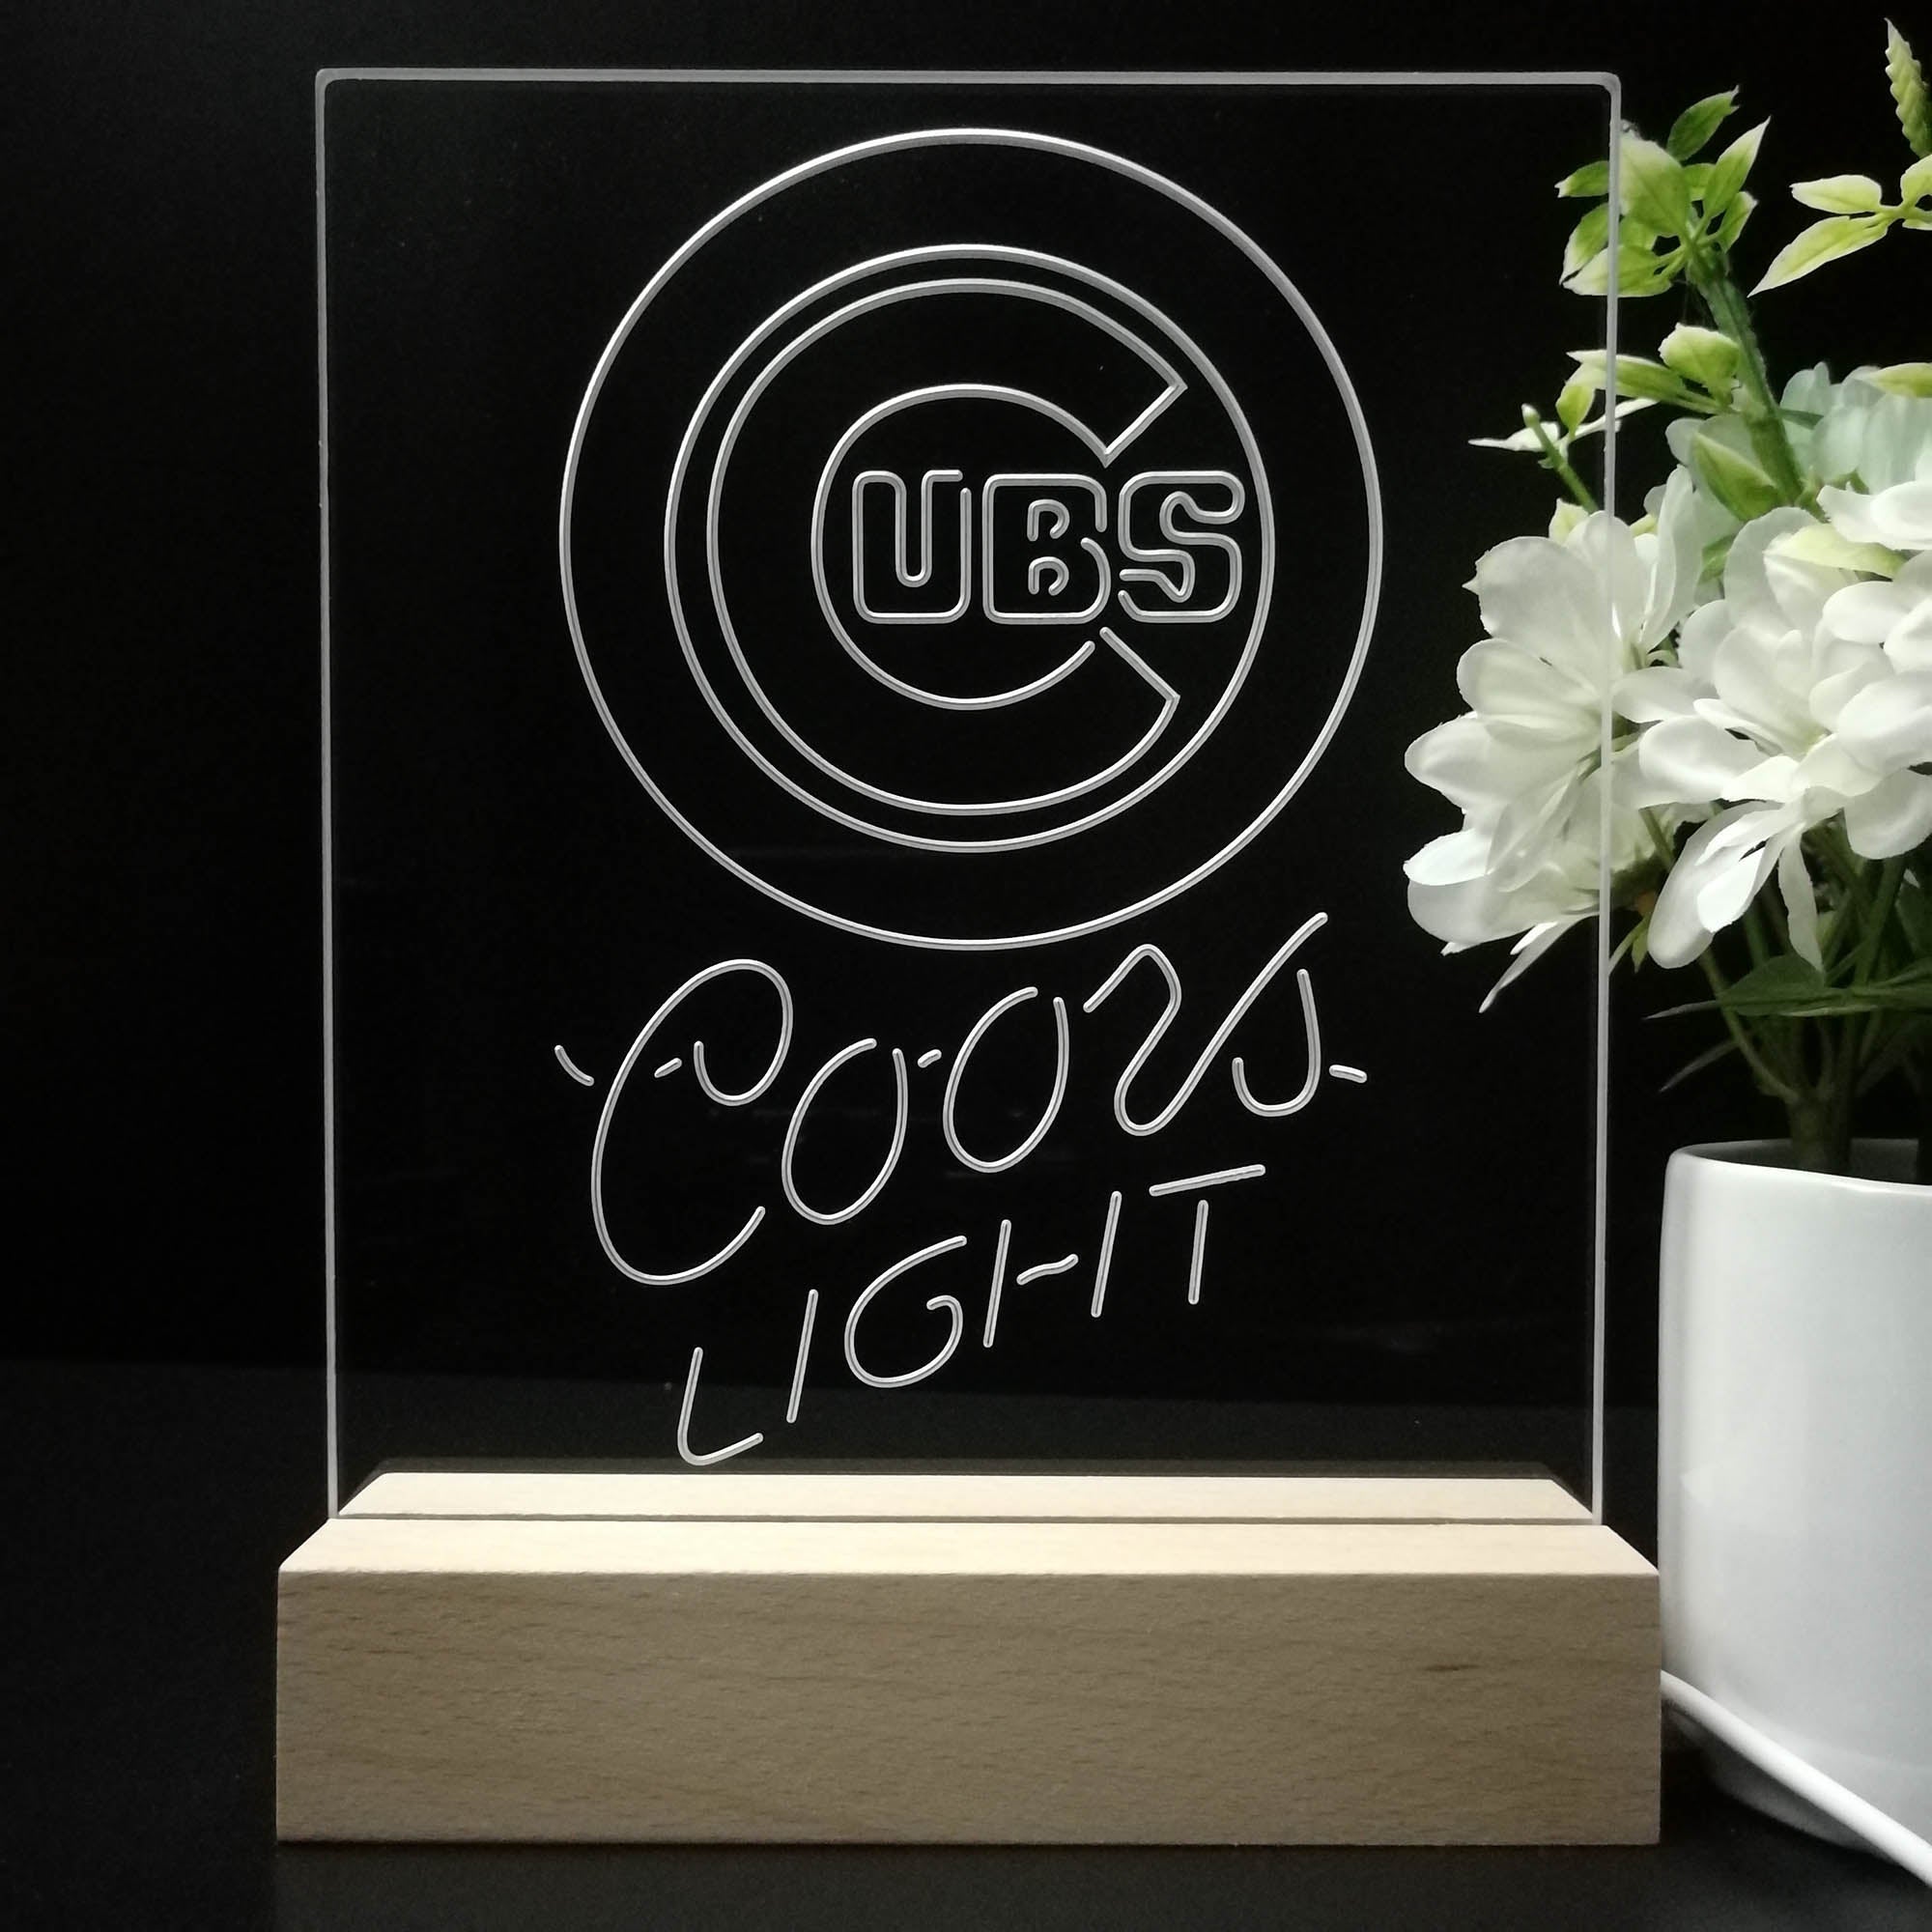 Chicago Cubs Coors Light 3D LED Optical Illusion Sport Team Night Light